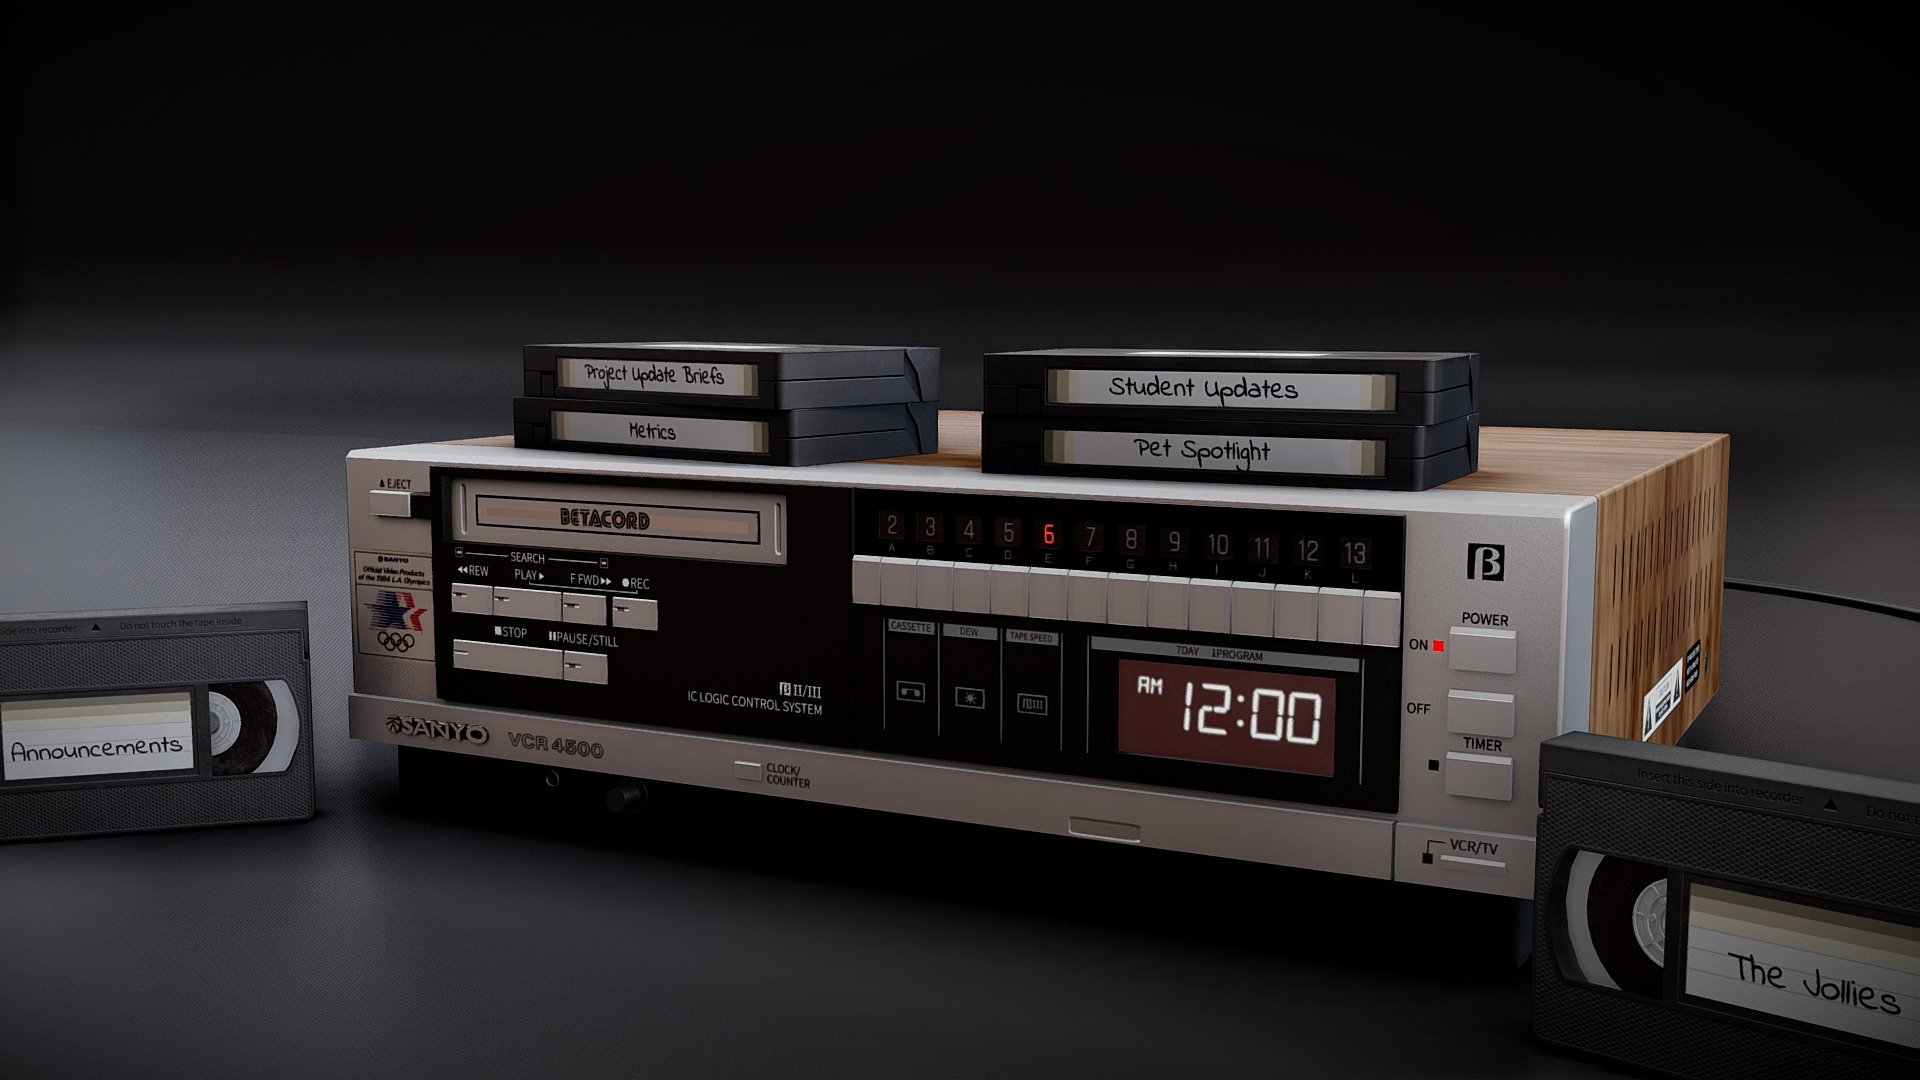 A Sanyo VCR 4500 Betacord VHS Recorder. Used in a render for my workplace's departmental newsletter.  Modeled in Blender and textured in Substance Painter.

Inspiration taken from: https://sketchfab.com/3d-models/vhs-scene-23d91d12bedc4c7db4402b611ff9f276 3d model